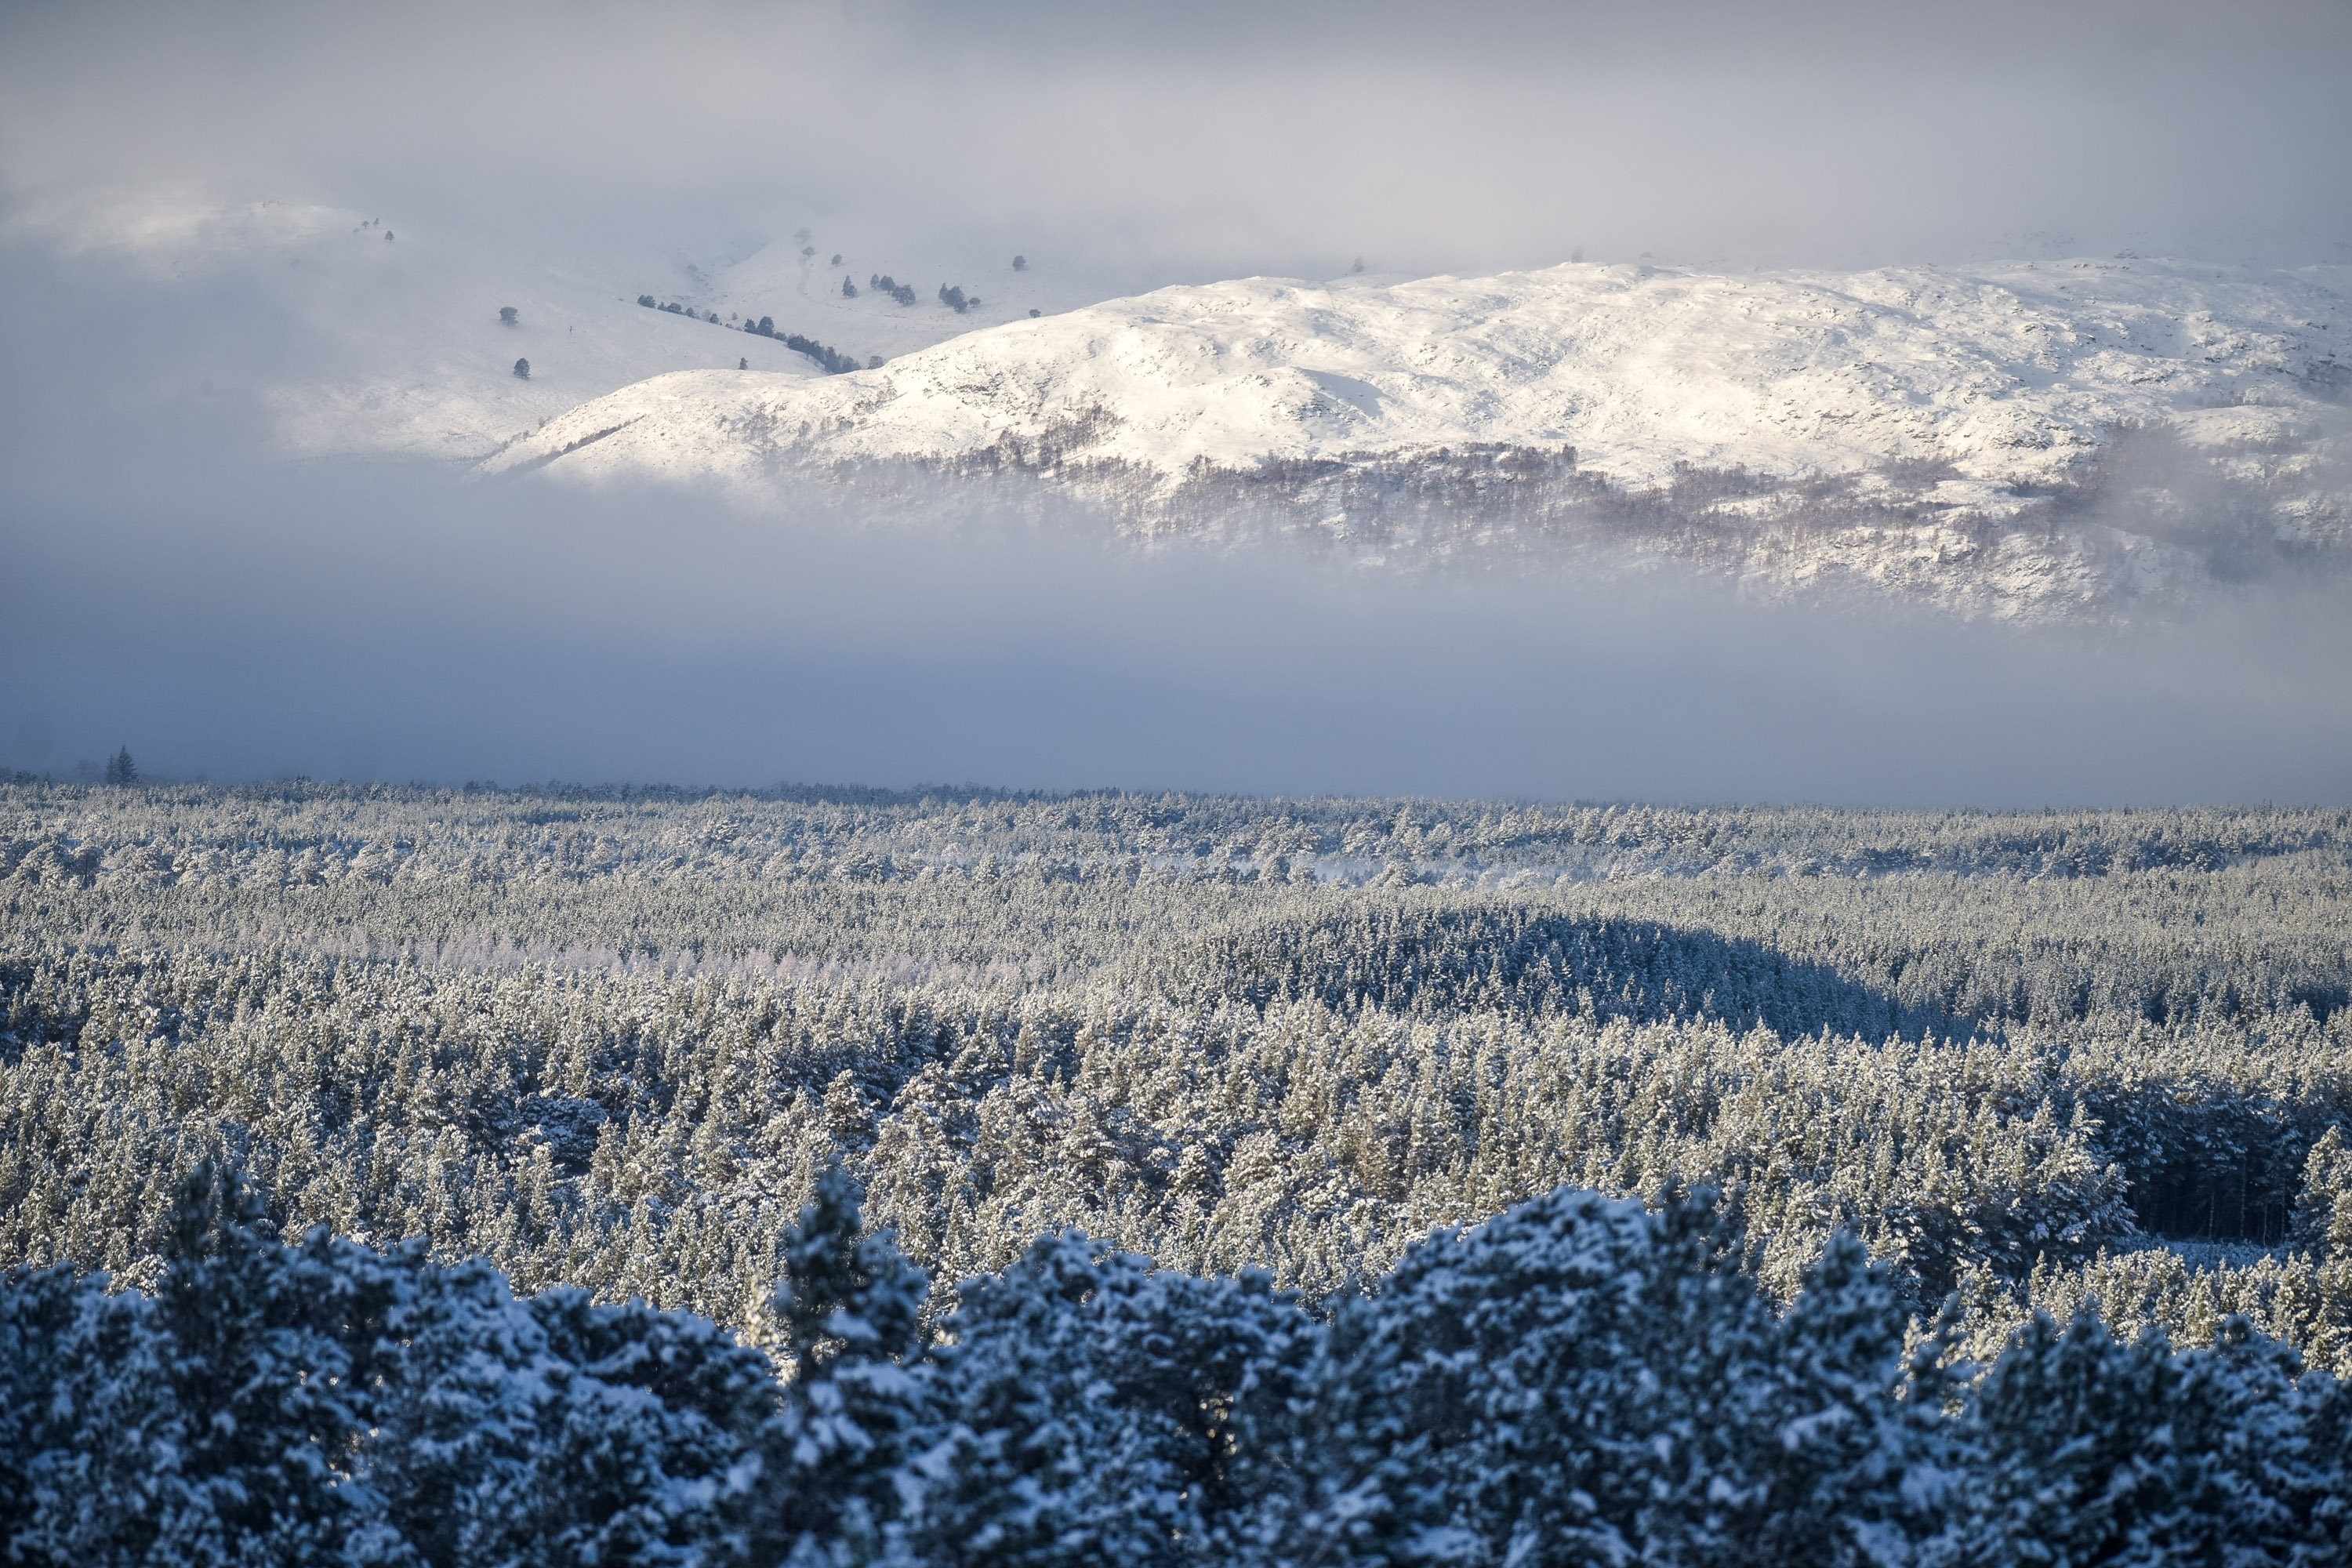 Snow covers trees and hills surrounding Aviemore